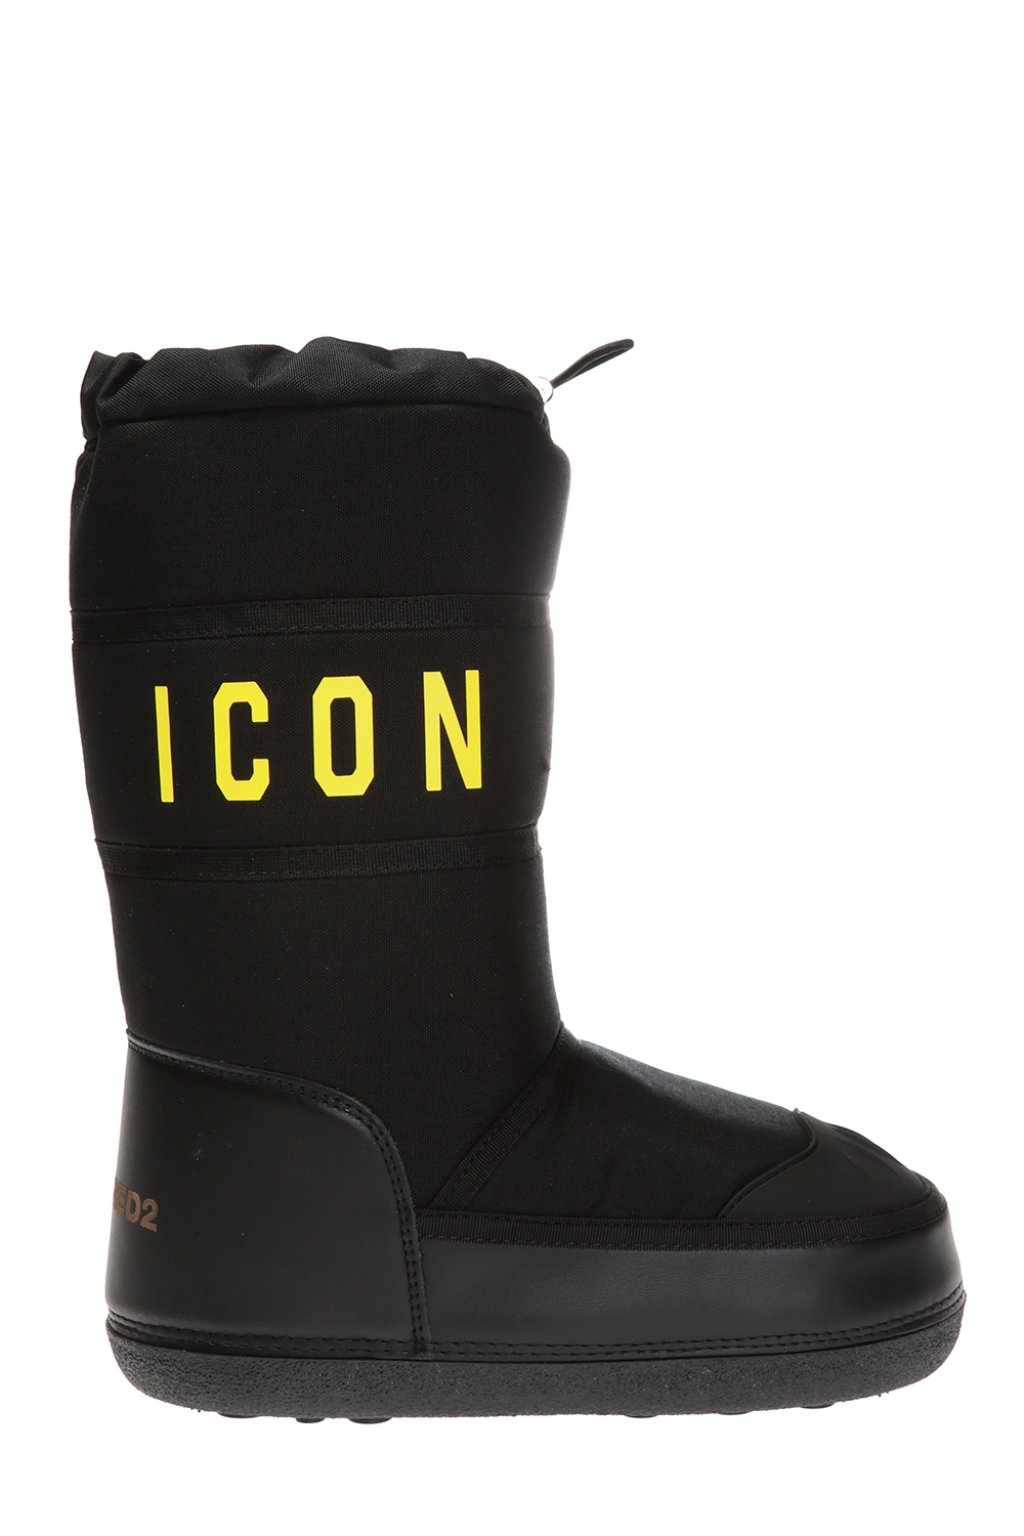 Branded moon boots Dsquared2 - Vitkac 